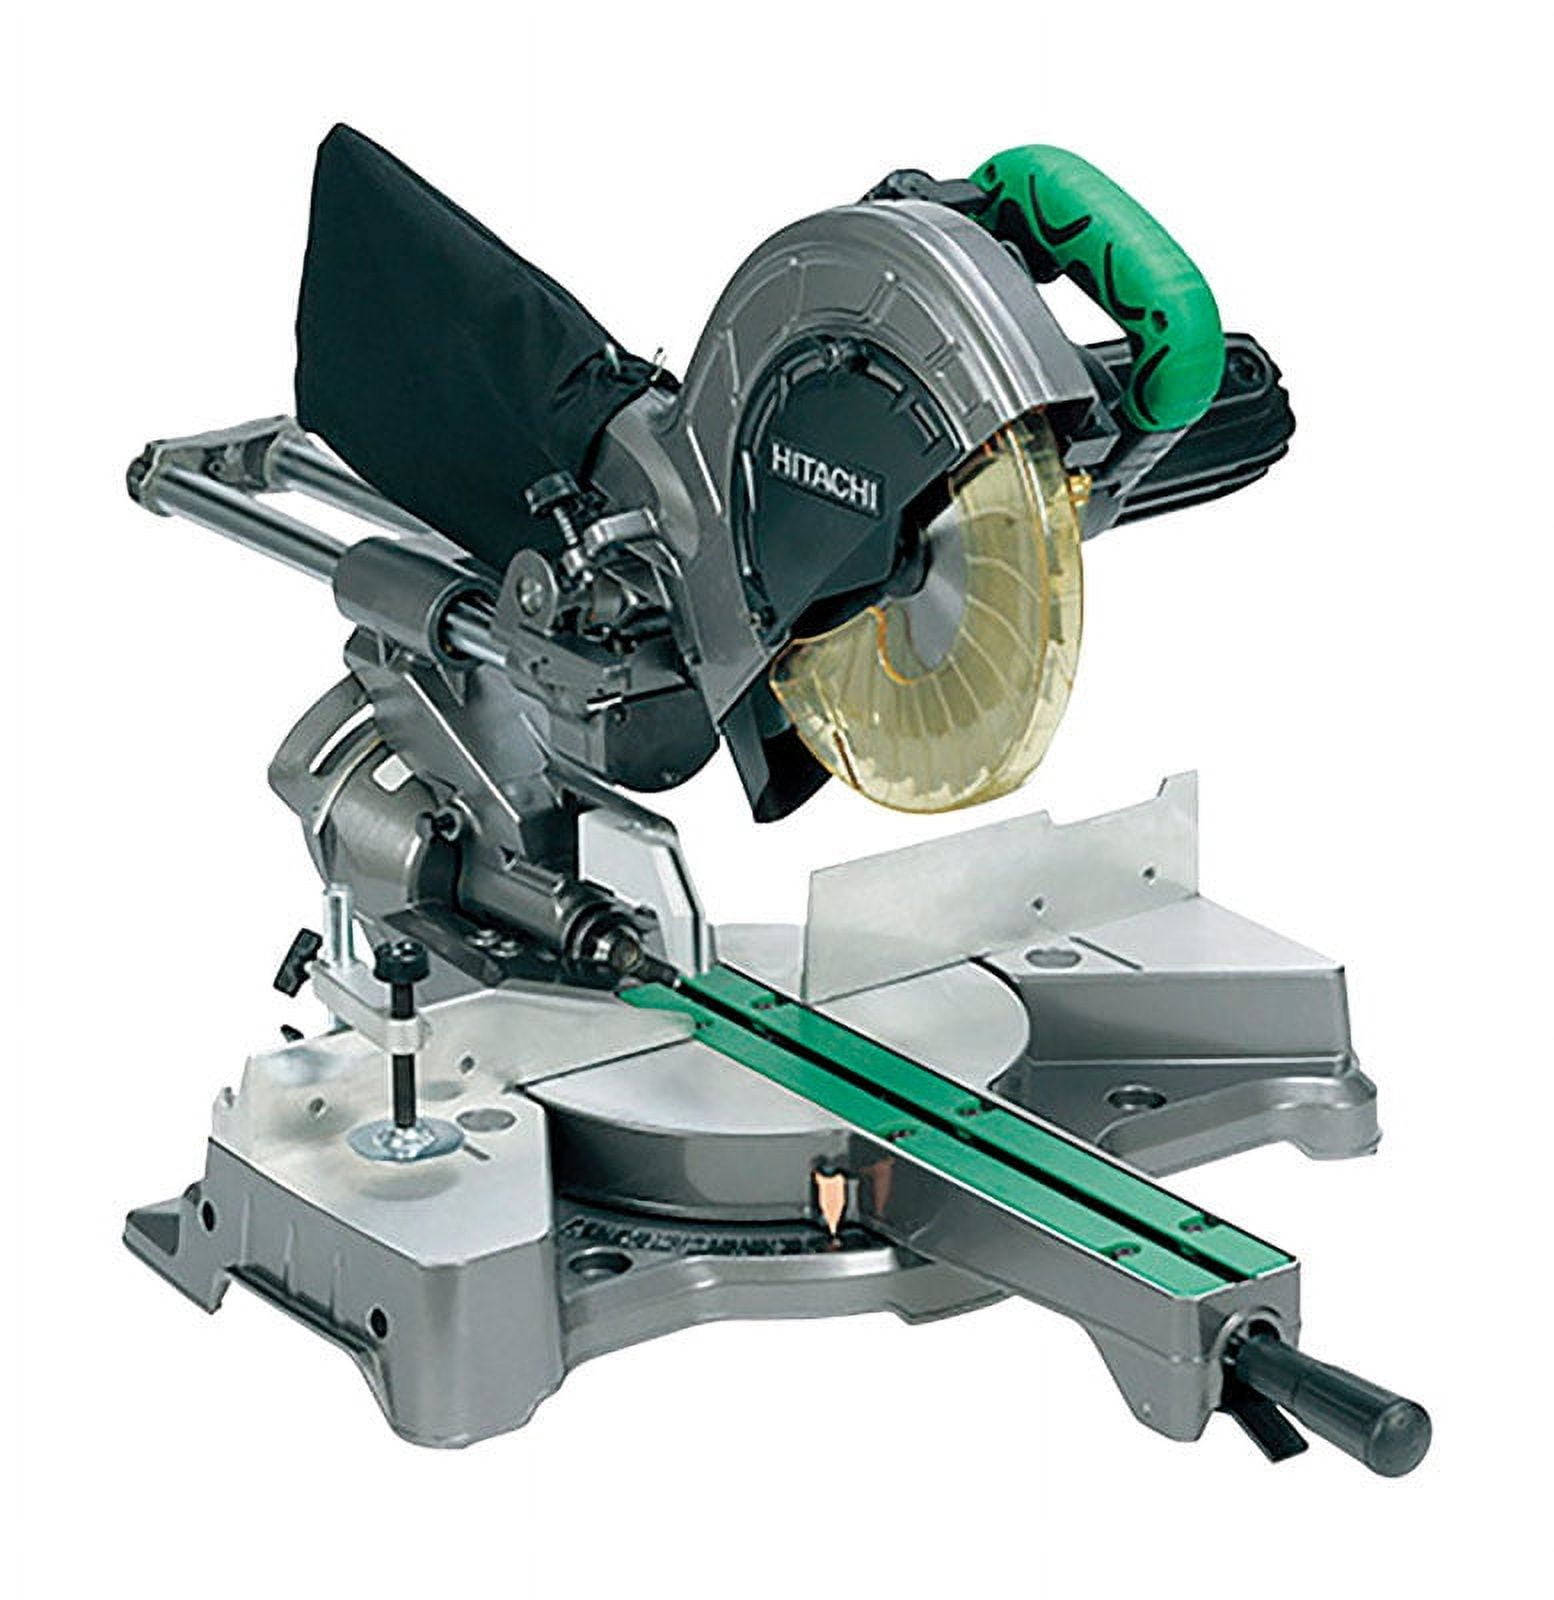 2221745 8.5 in. Corded 9.2 amp Compound Miter Saw - 120V & 5500 RPM -  Metabo HPT, C8FSESM